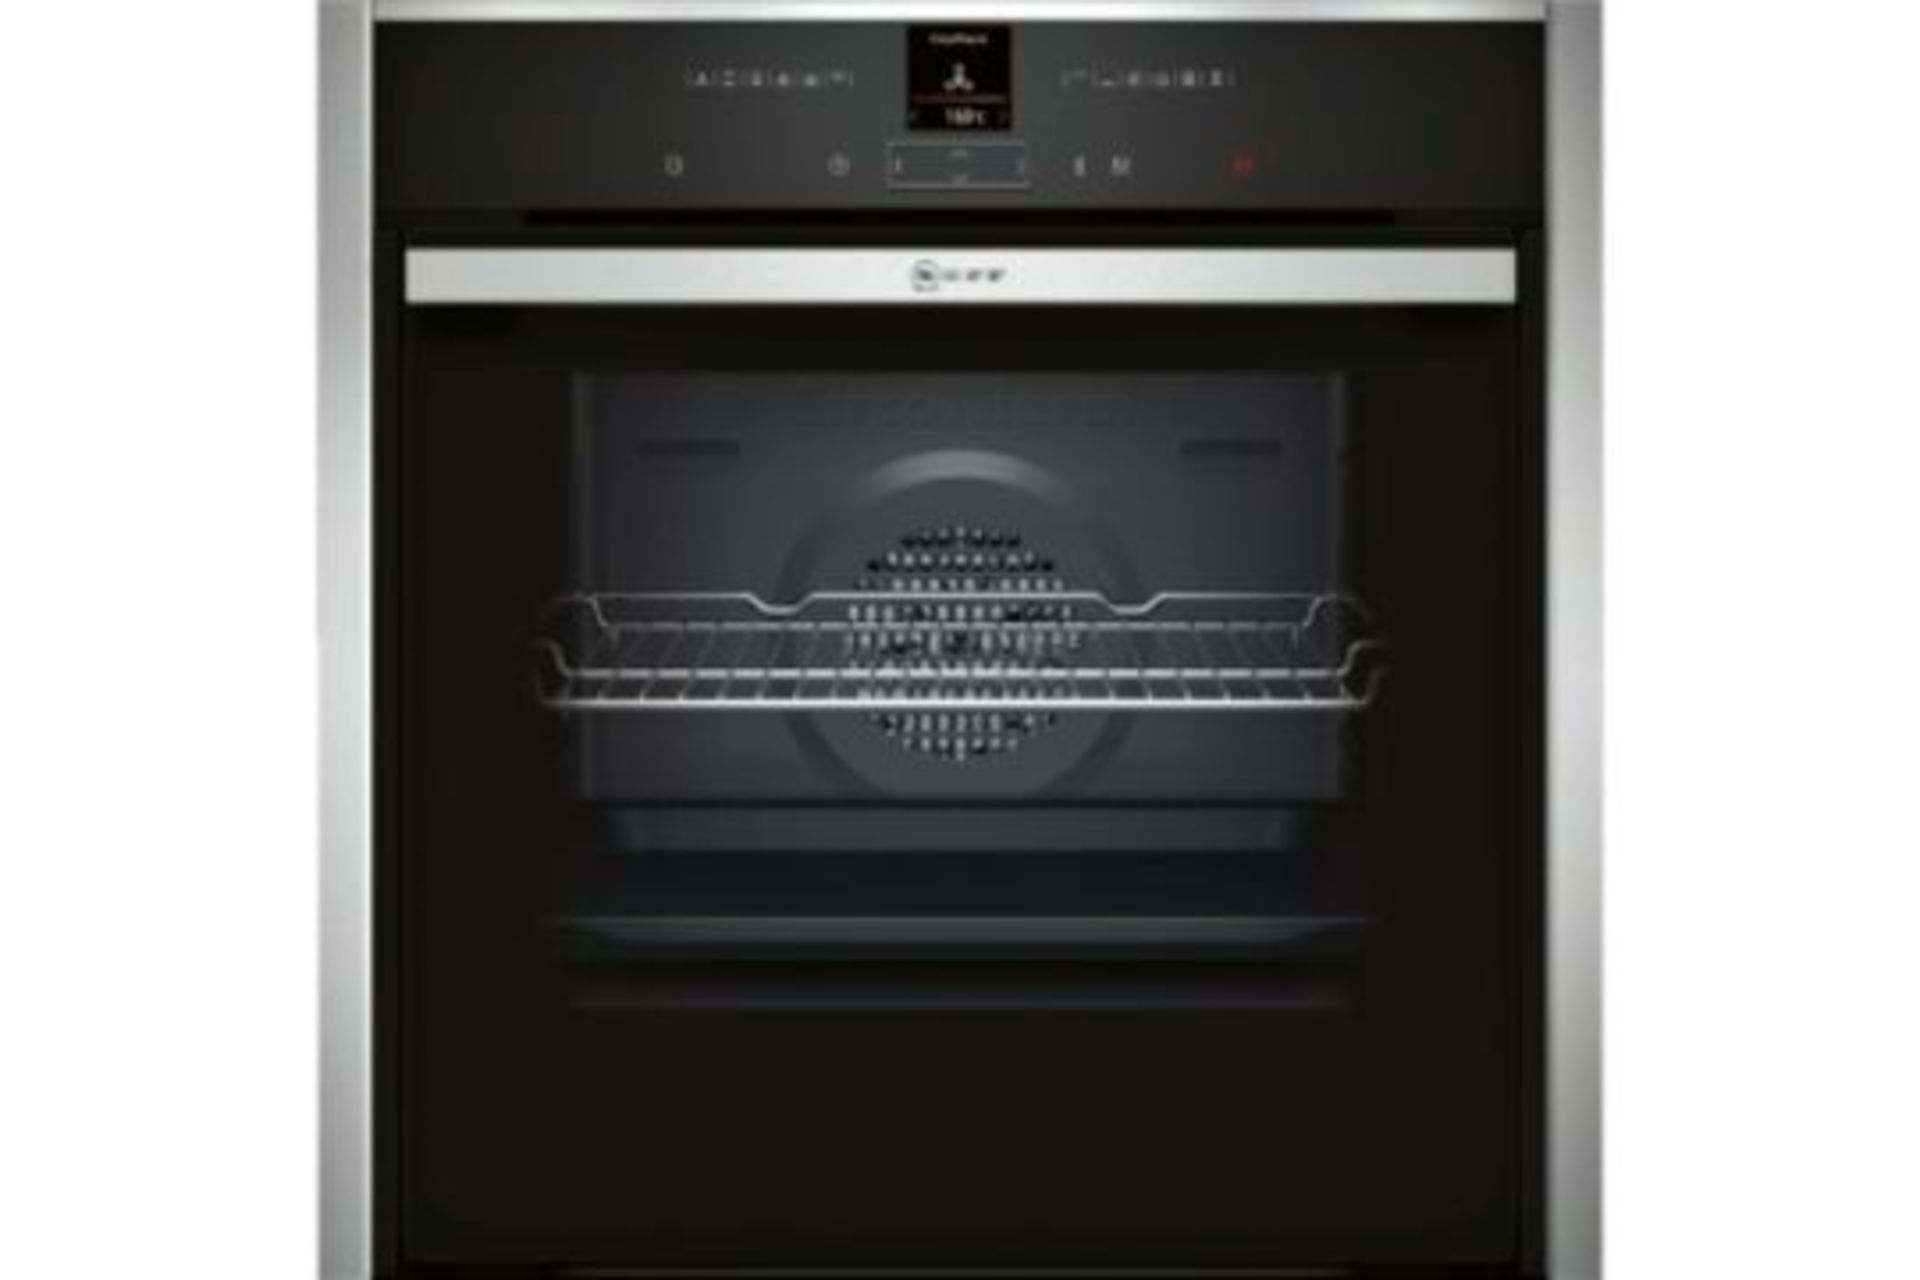 (AC12) New NEFF Built-in Single Pyro Oven Stainless Steel with Slide and Hide B57CR22N0B. RRP £